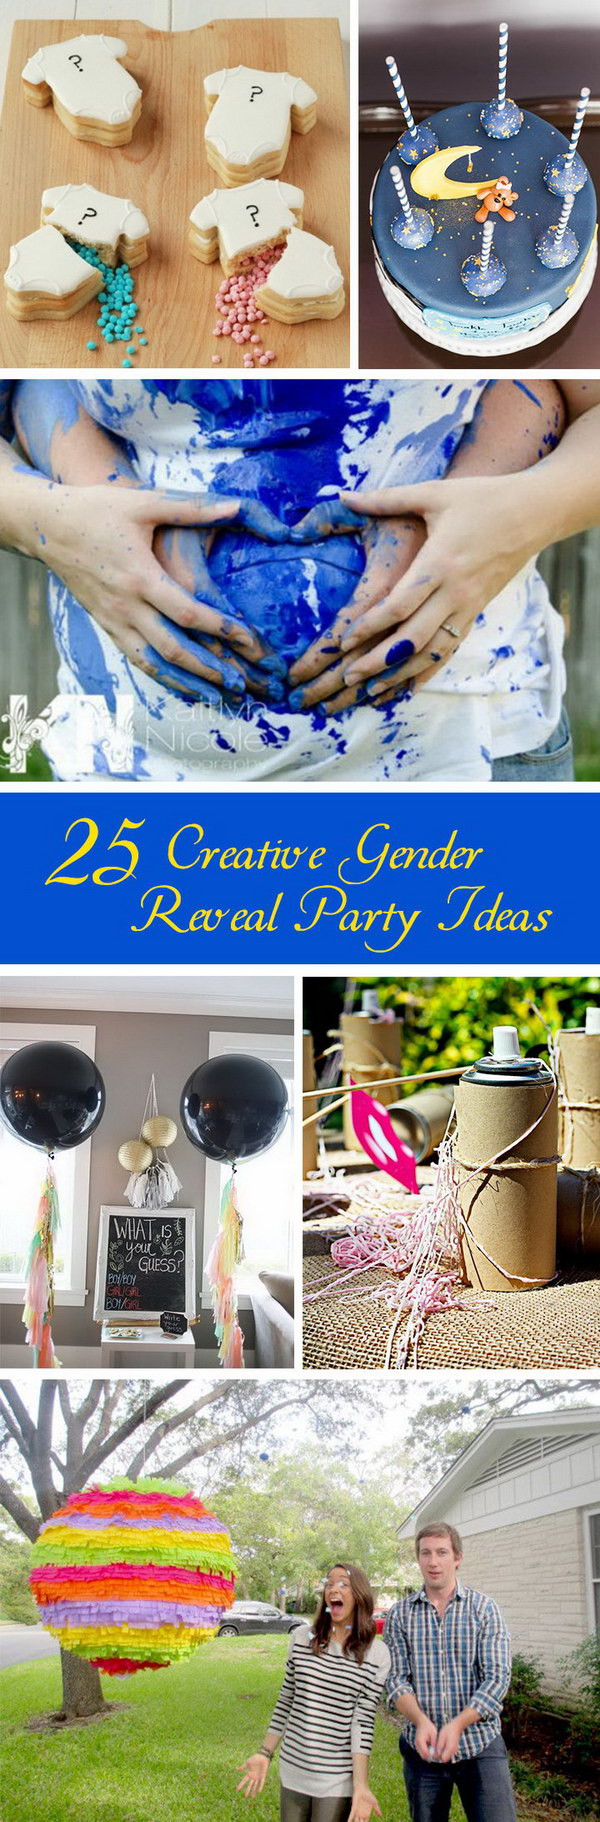 Creative Gender Reveal Party Ideas
 25 Creative Gender Reveal Party Ideas Hative